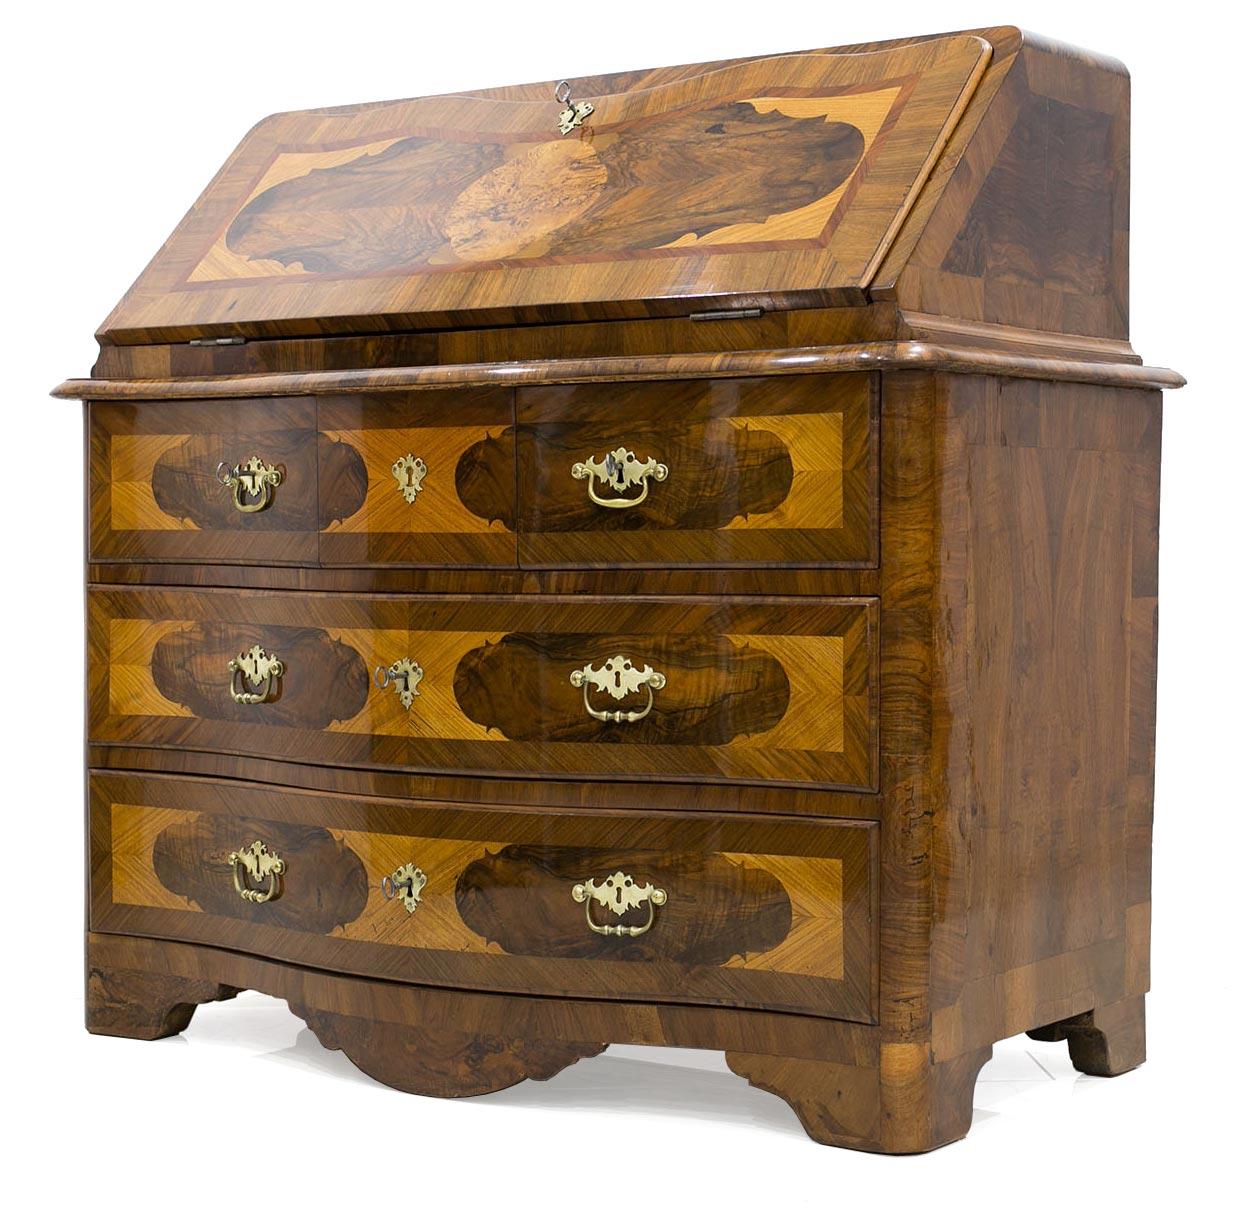 This beautiful Secretarie was made in Germany, circa 1780. The piece is made of walnut wood, veneered with stunning details of various types of wood, nut, plum, ash and maple. It features 3 practical spacious drawers with original locks and